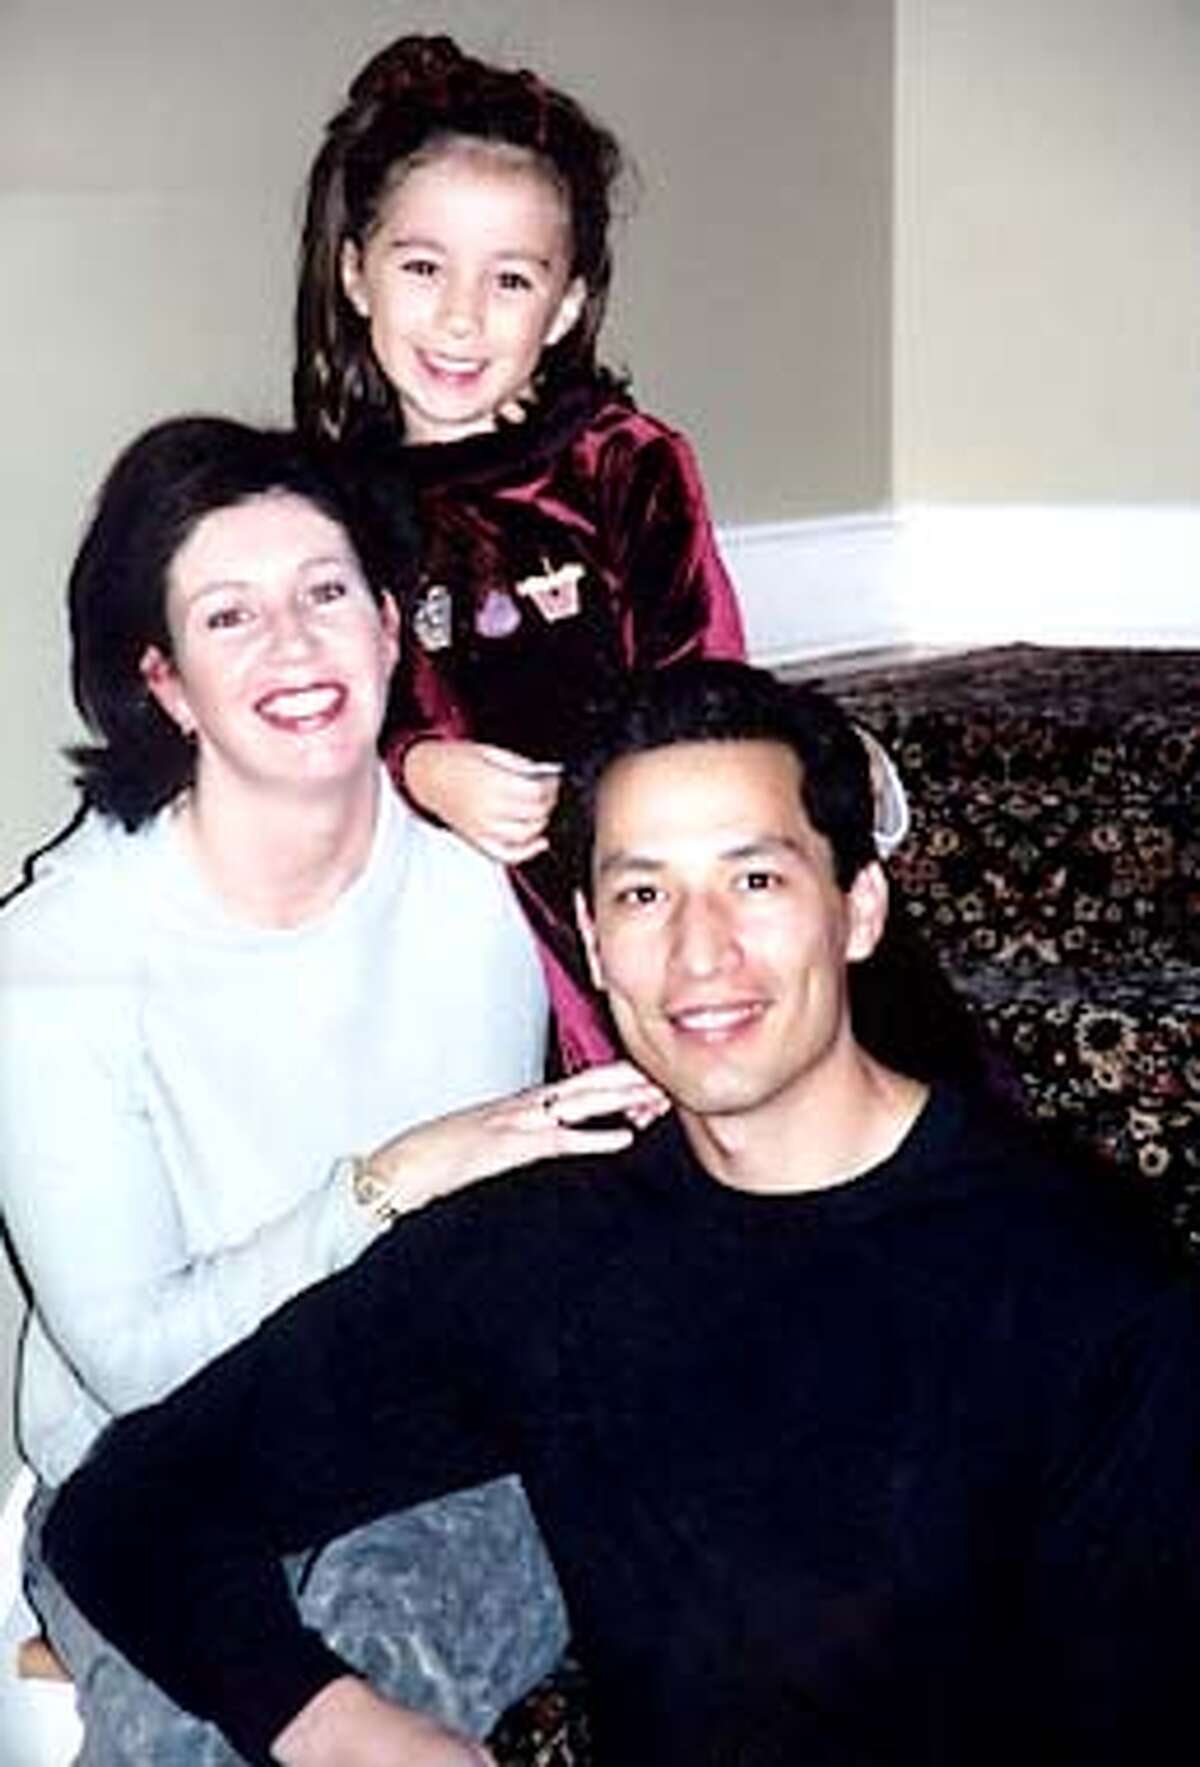 FILE -- Patrick Quigley, front, right, of Wellesley, Mass., is shown in this undated family photo with his wife, Patricia Quigley, and daughter Rachel, 5. Patrick Quigley was aboard United Airlines Flight 175 which crashed into the World Trade Center in New York on Tuesday, Sept., 11, 2001. (AP Photo/Family Handout, File)